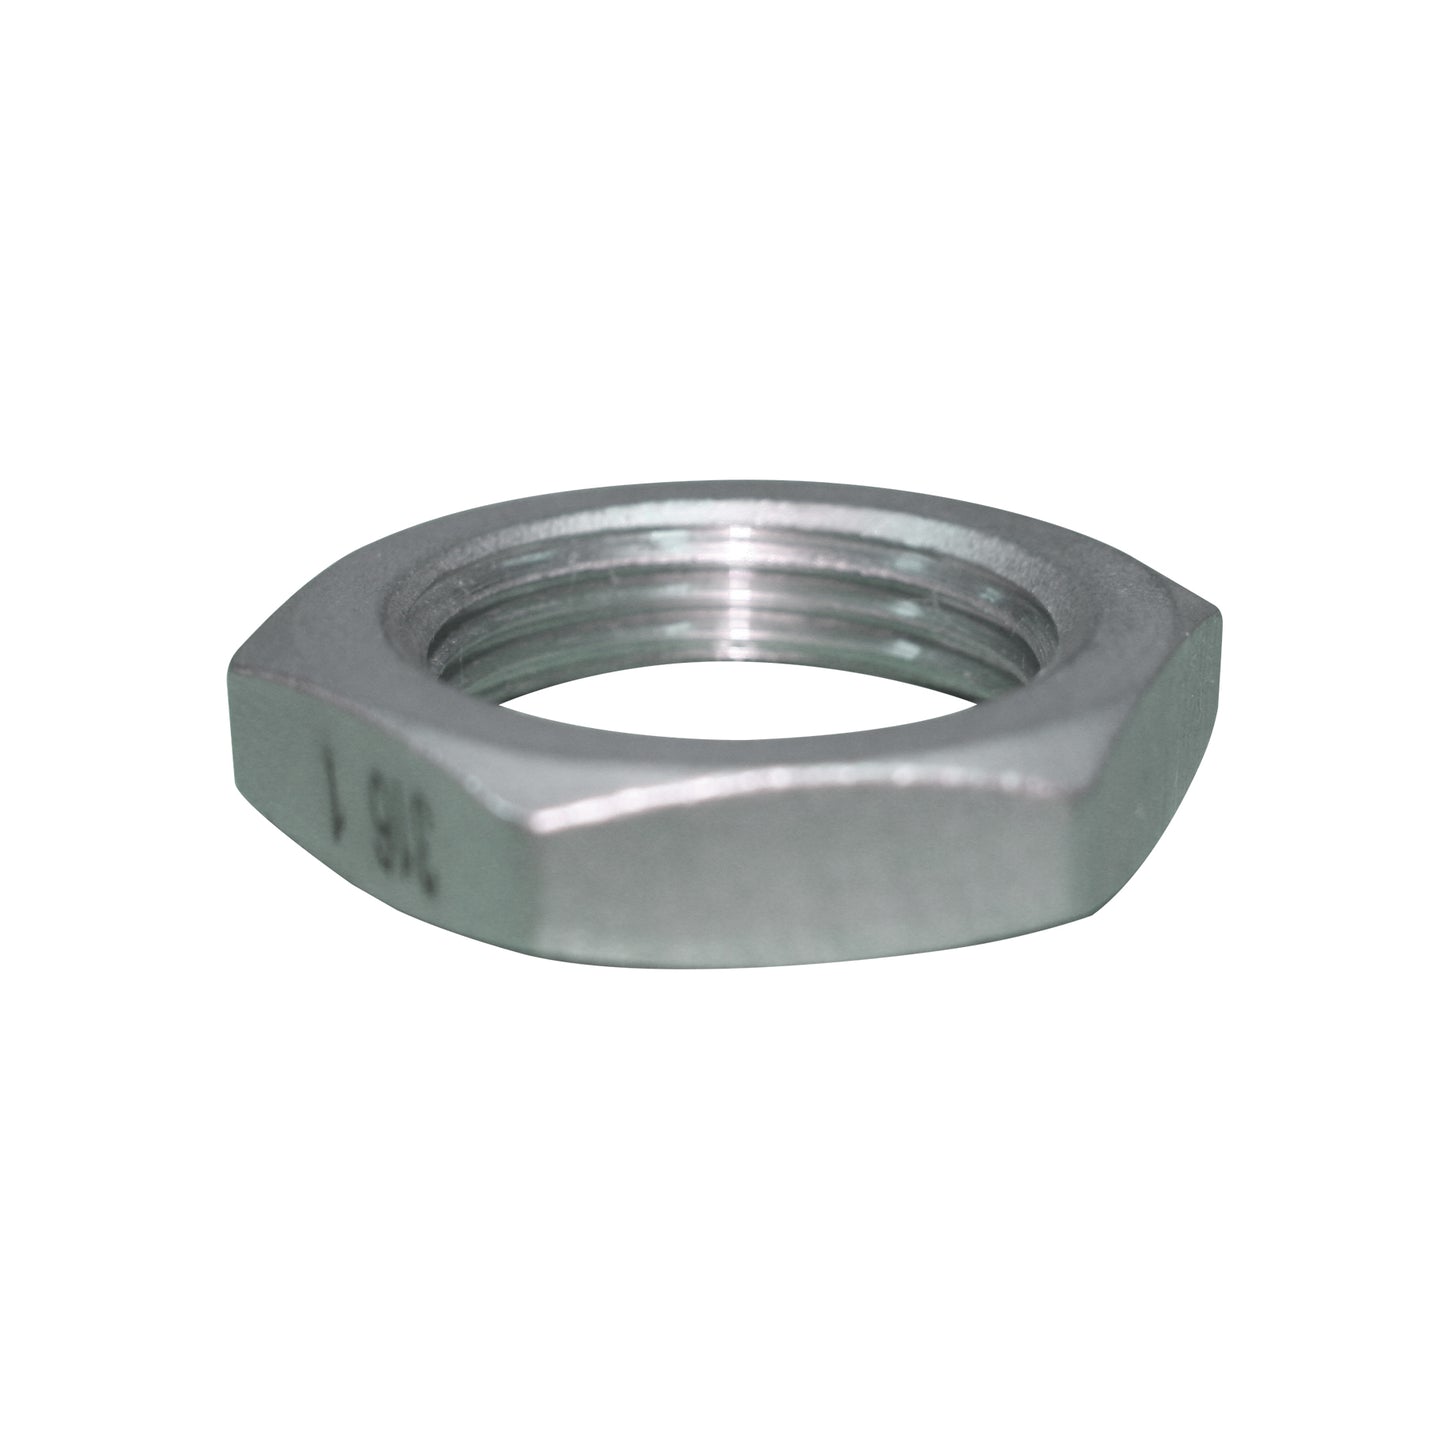 1 1 4 stainless steel back nut ss150